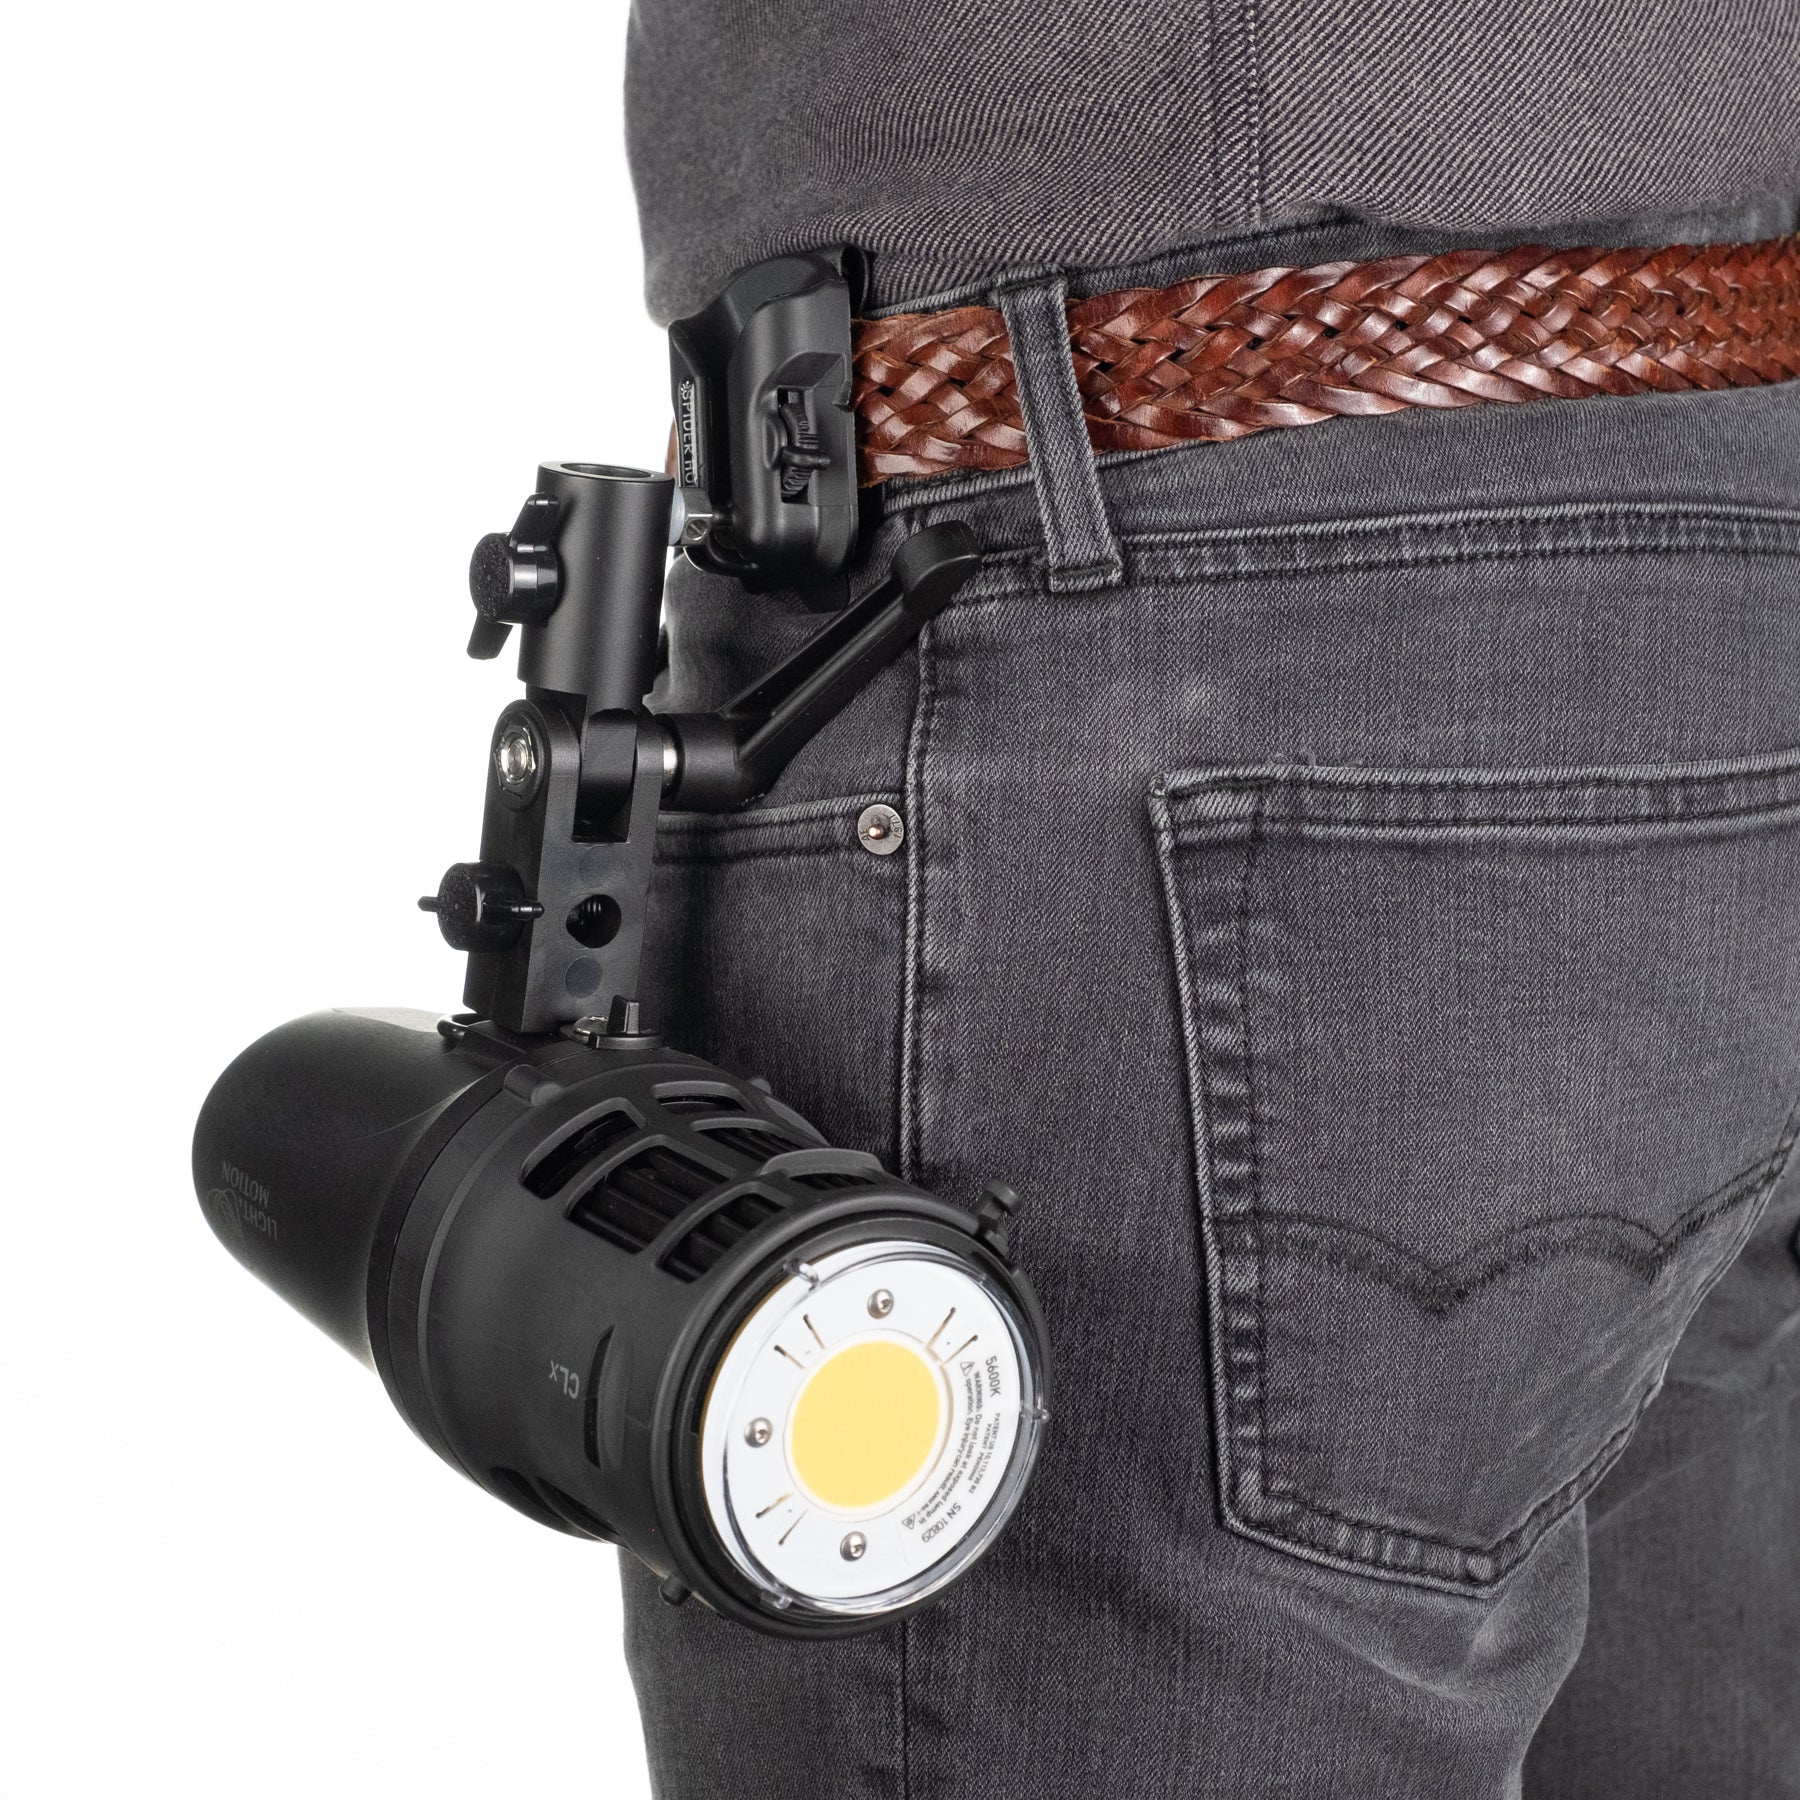 Spider X Belt Holster + Accessory Pin Kit